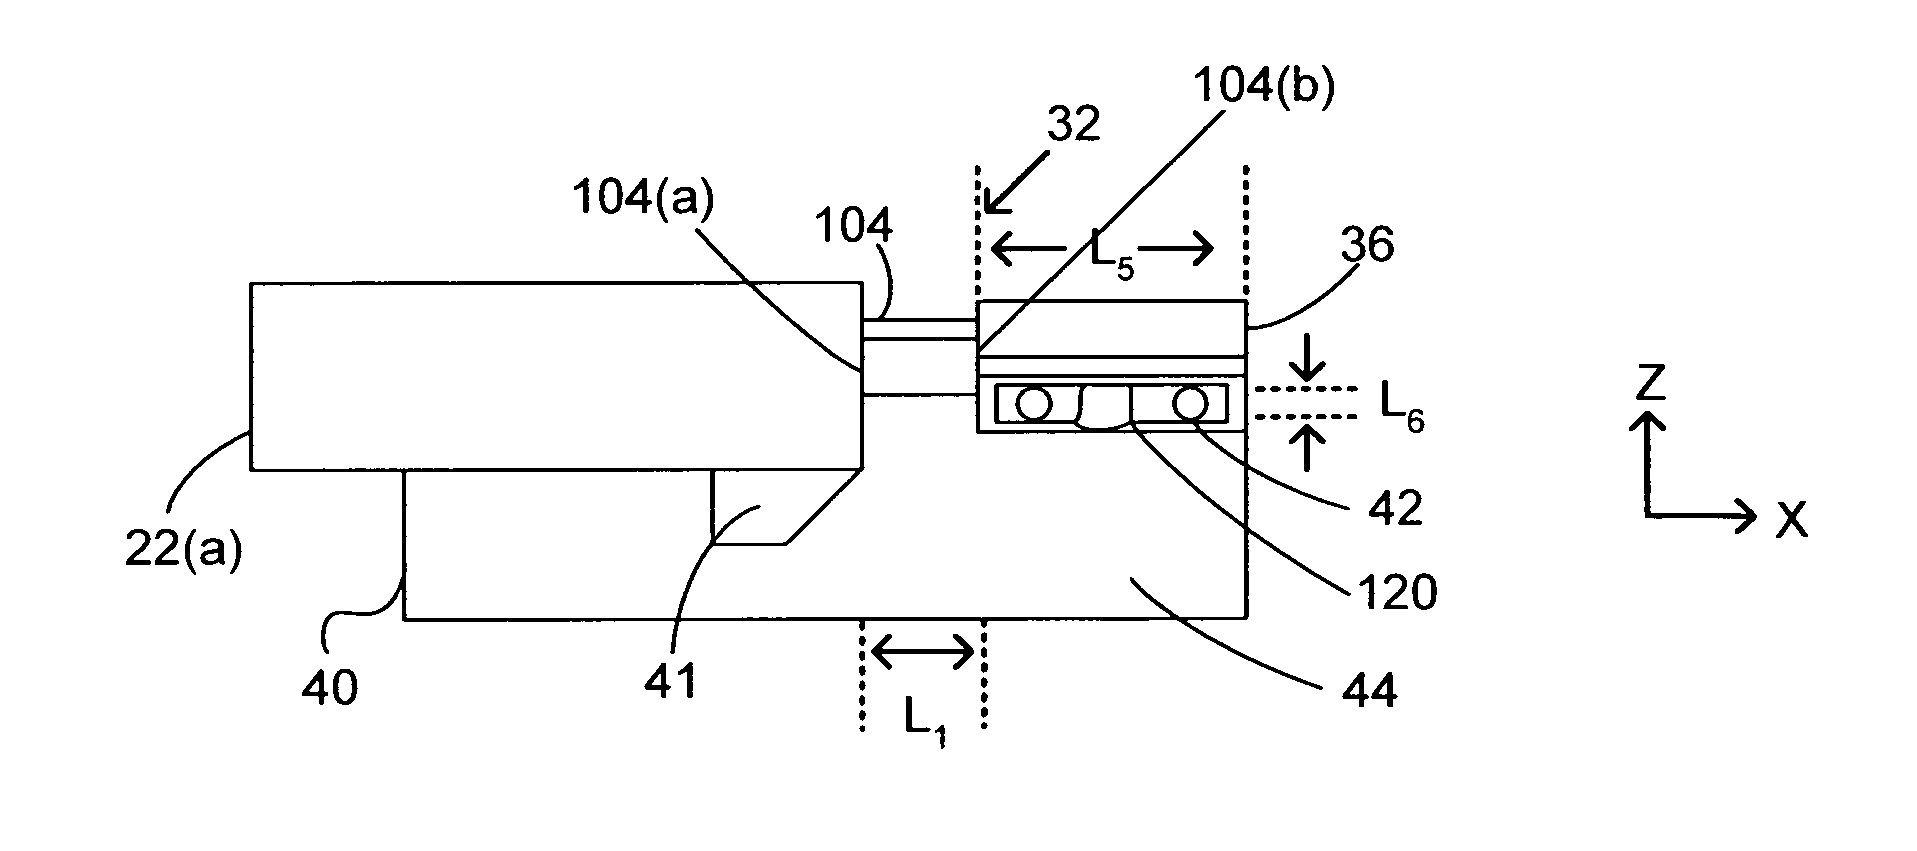 Optical beam transformer module for light coupling between a fiber array and a photonic chip and the method of making the same